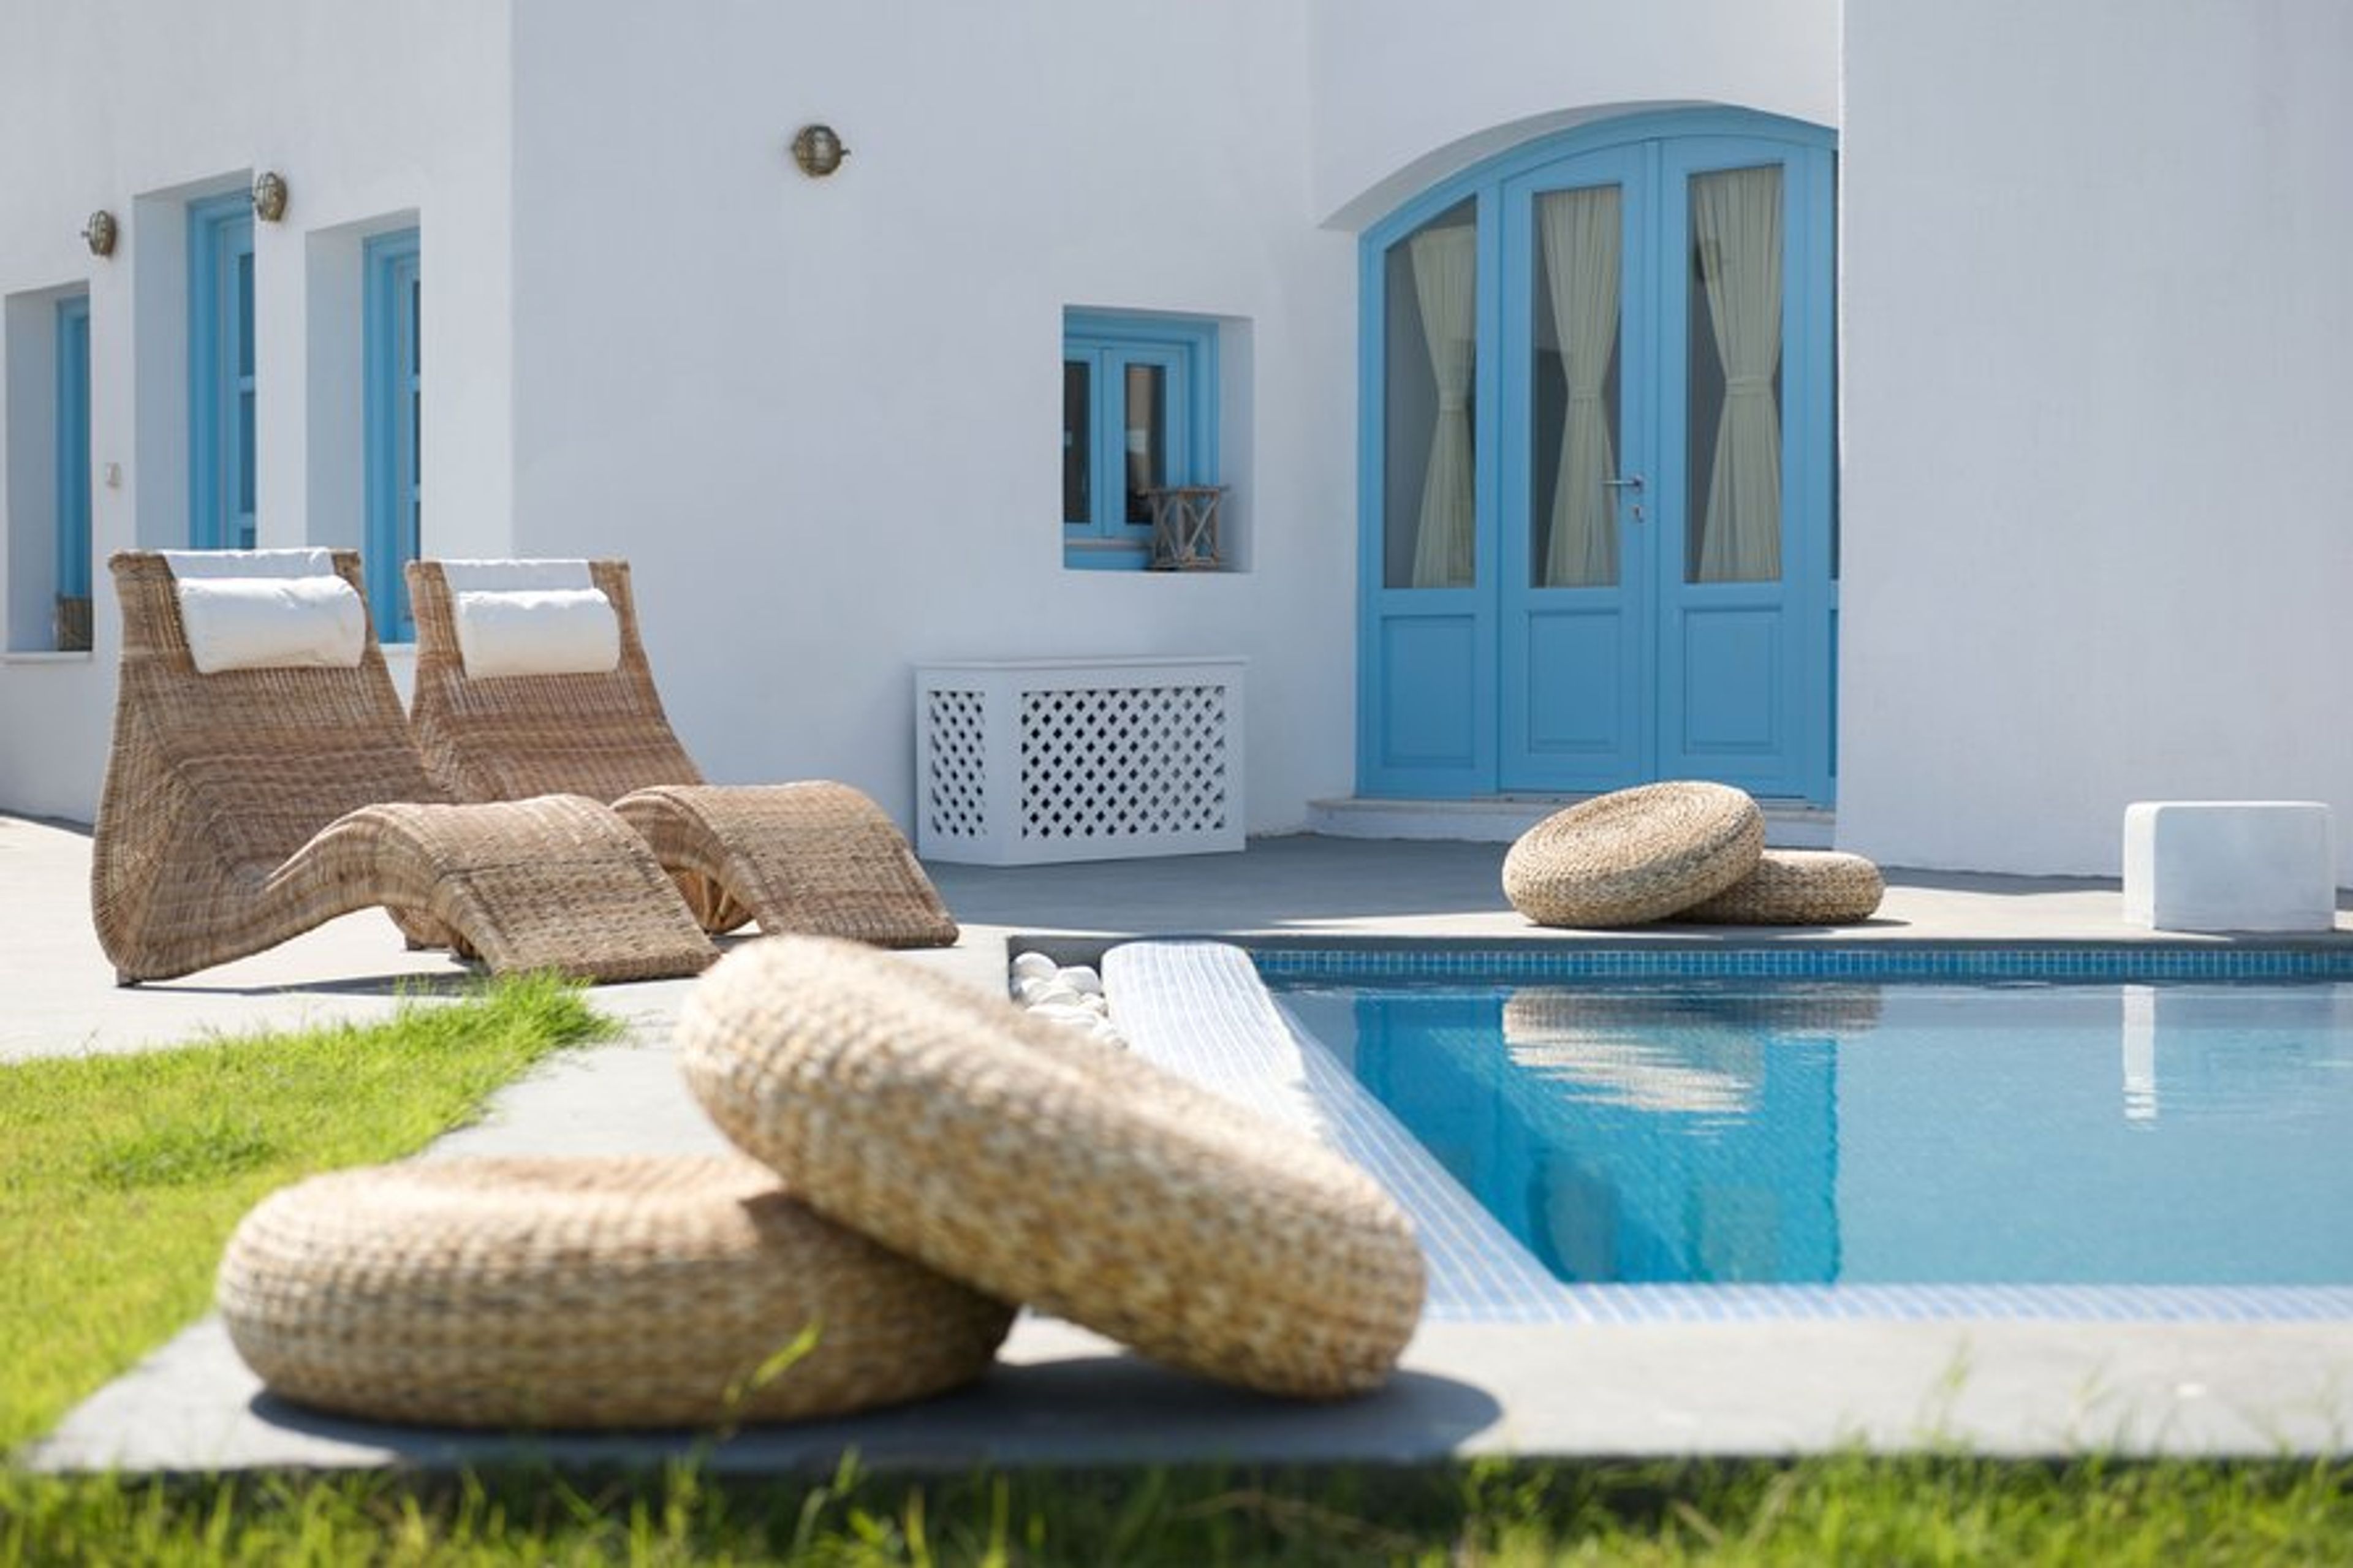 Livas Guesthouse - Private pool and jacuzzi